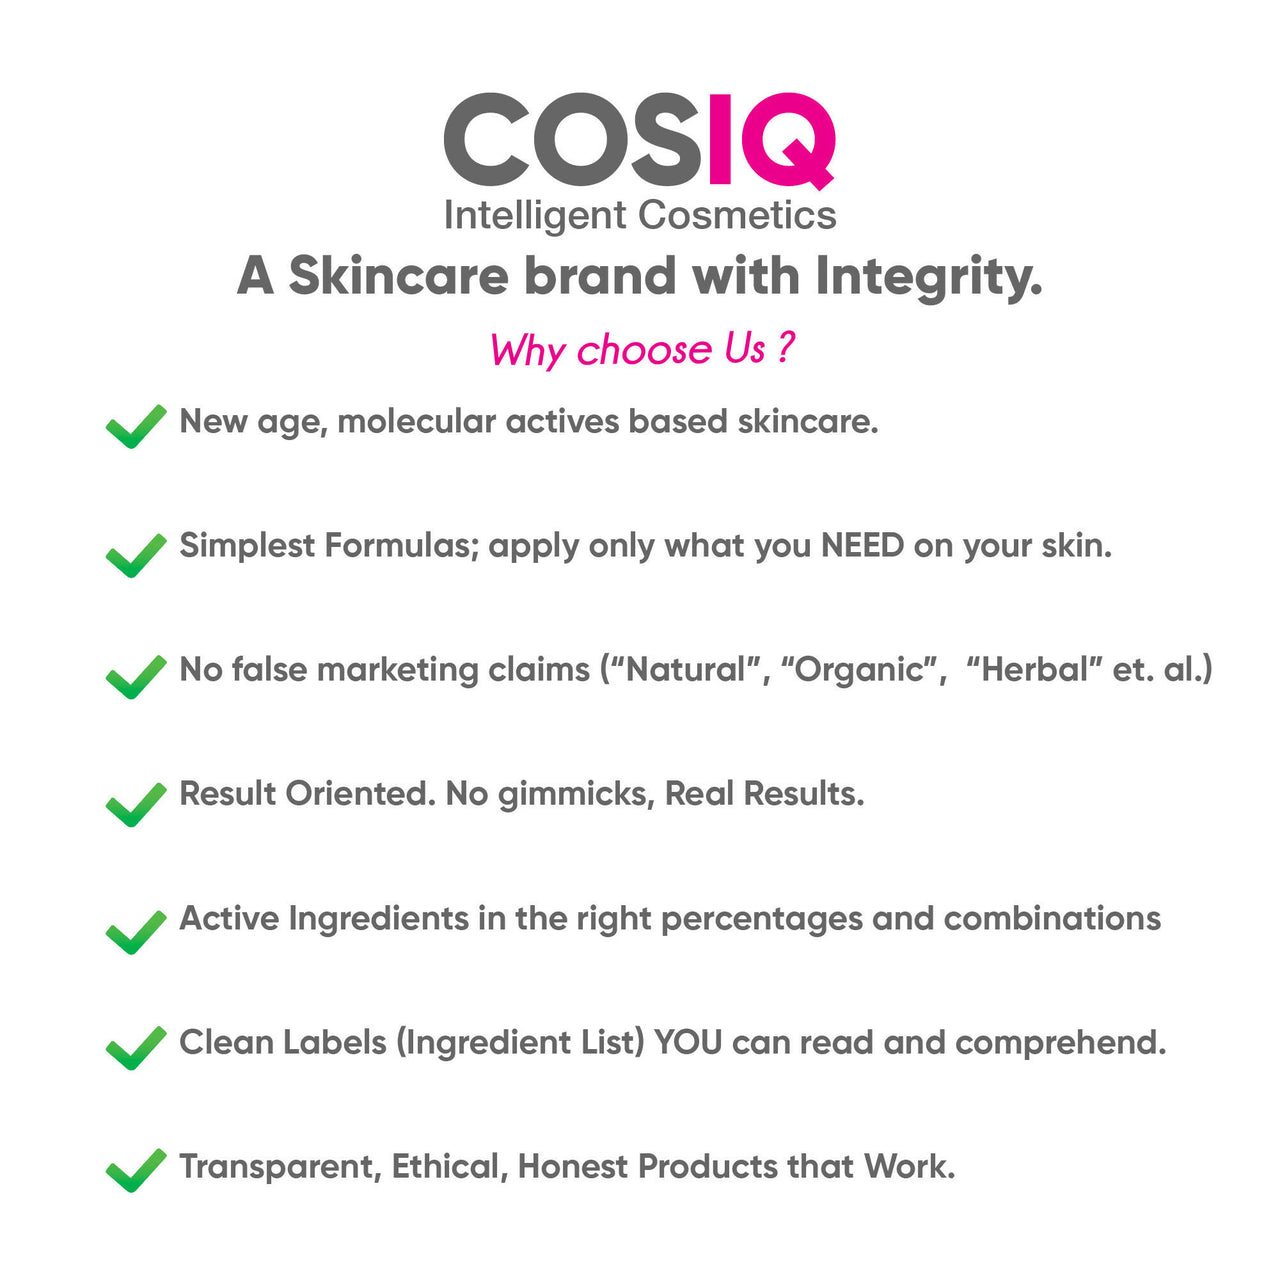 Cos-IQ AirGel NMF 15% for Oily Skin Moisturizer - Distacart